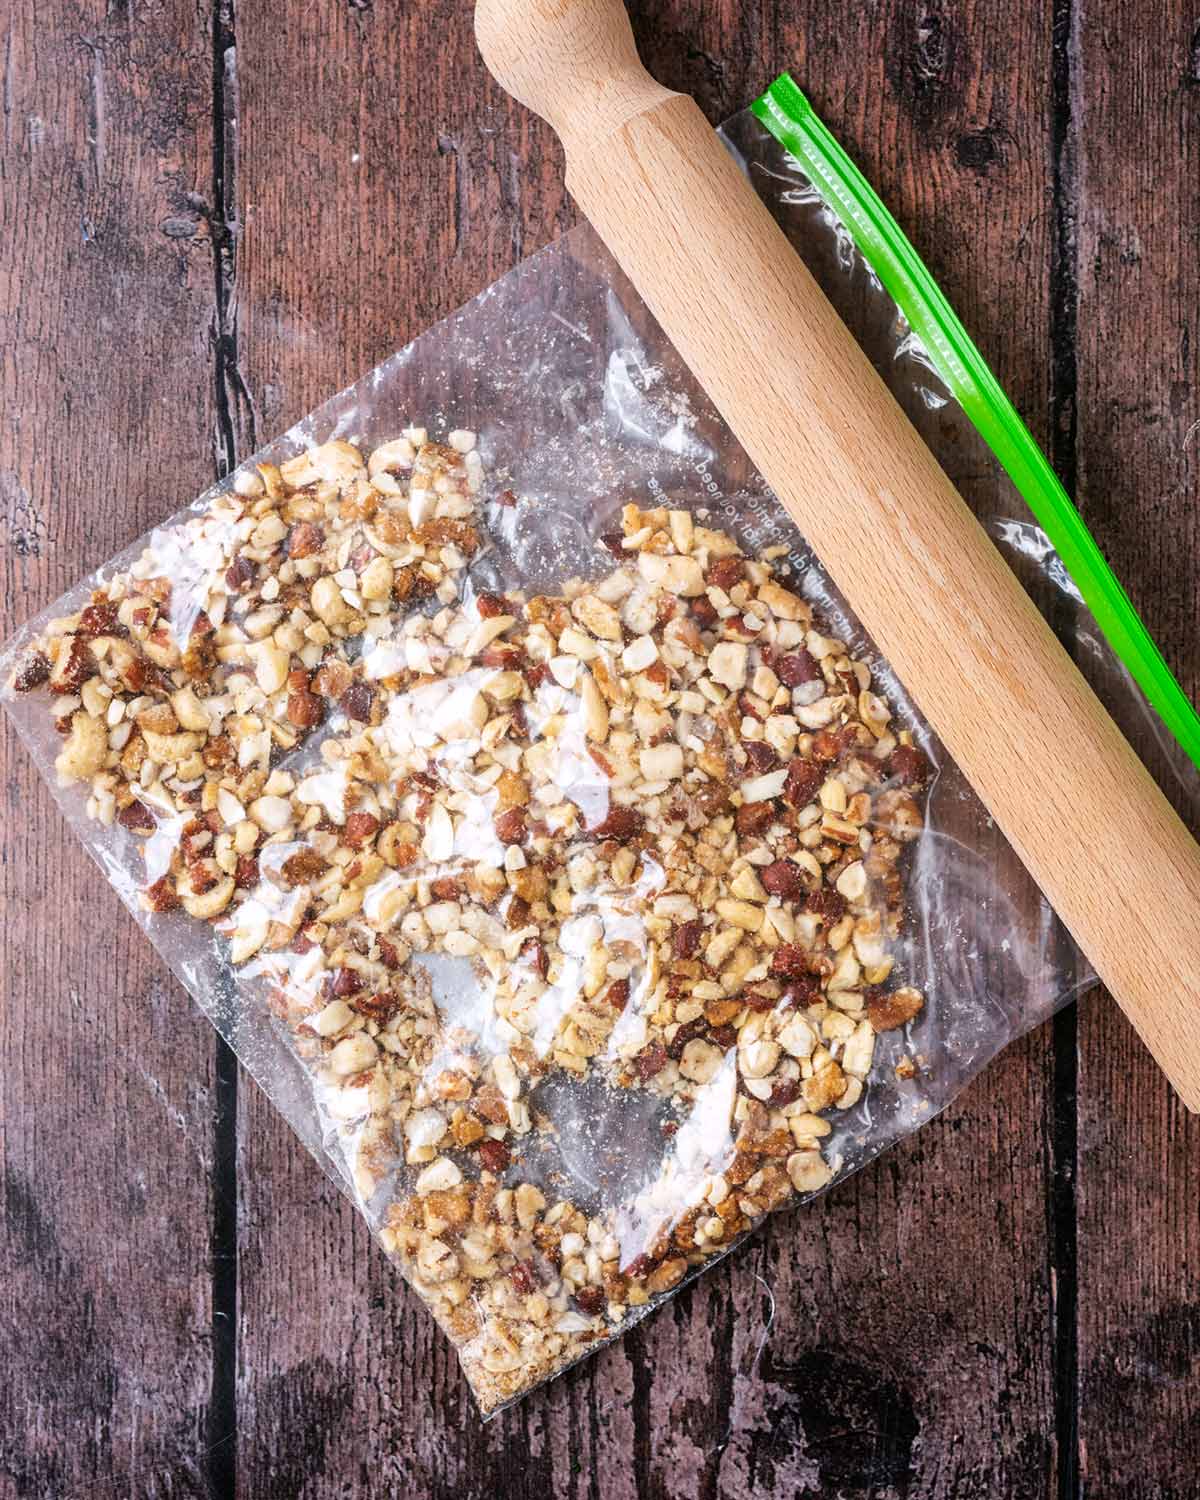 A clear ziplock bag containing crushed nuts.